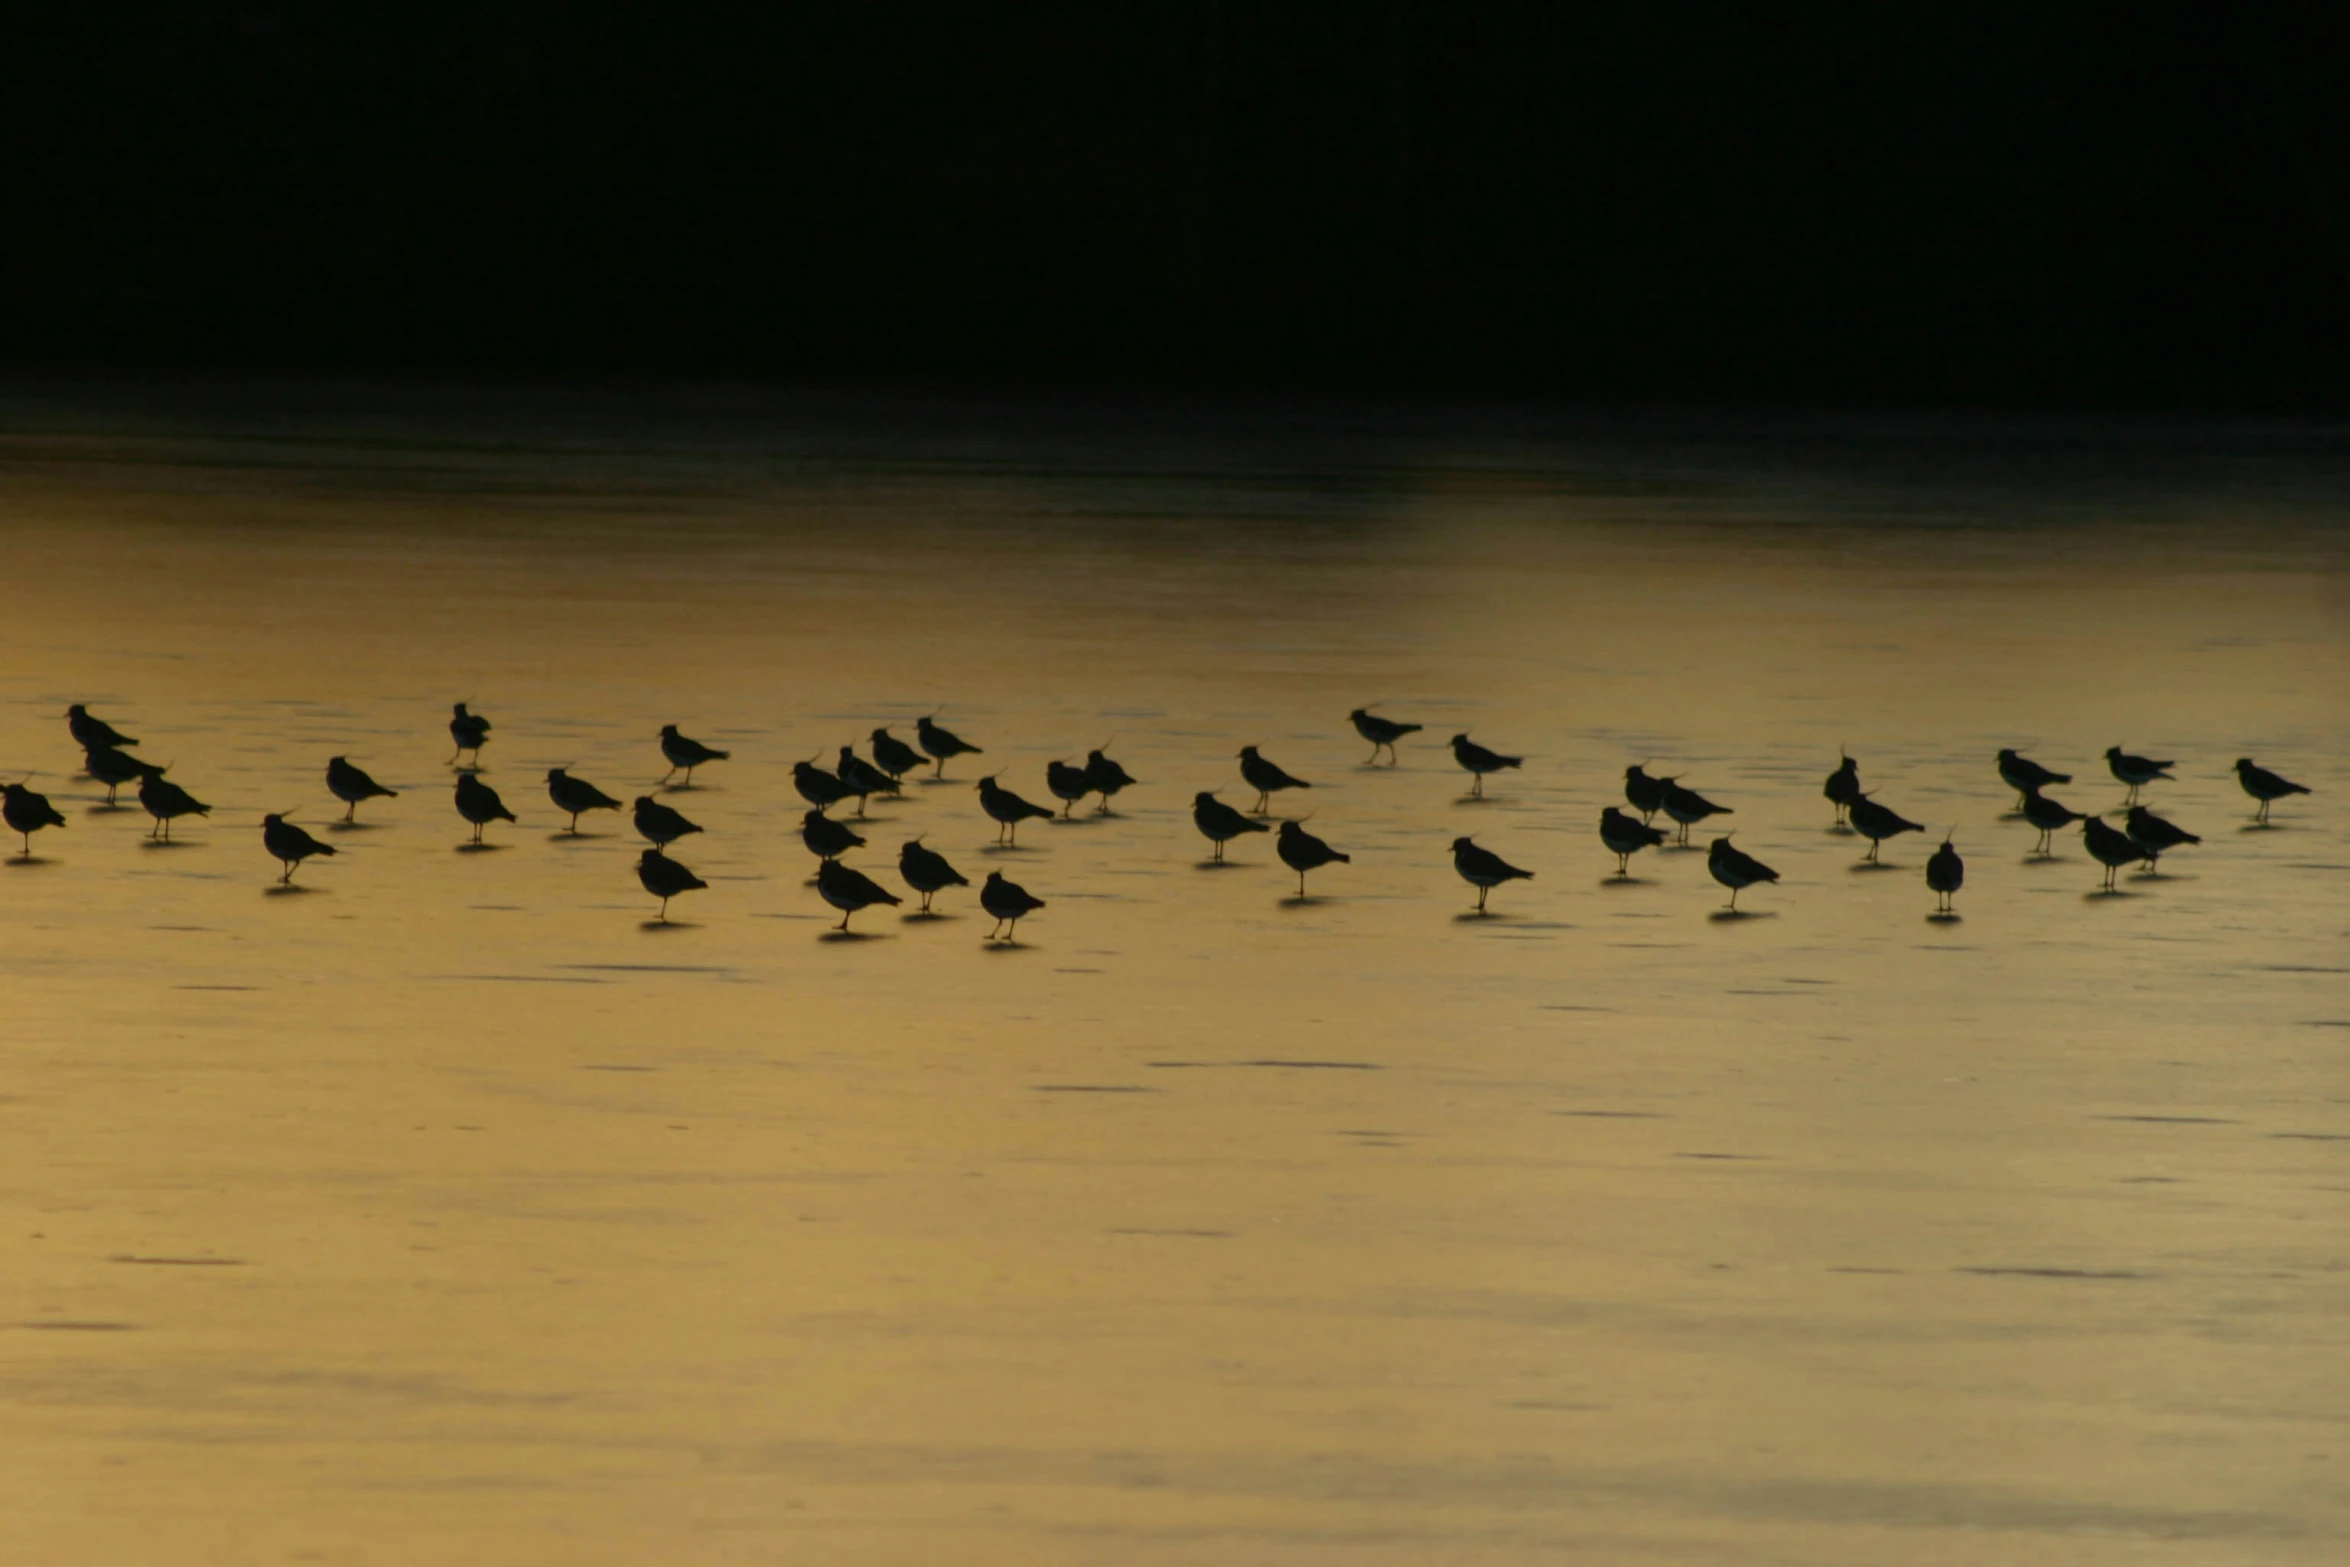 the birds are walking in the water at sunset